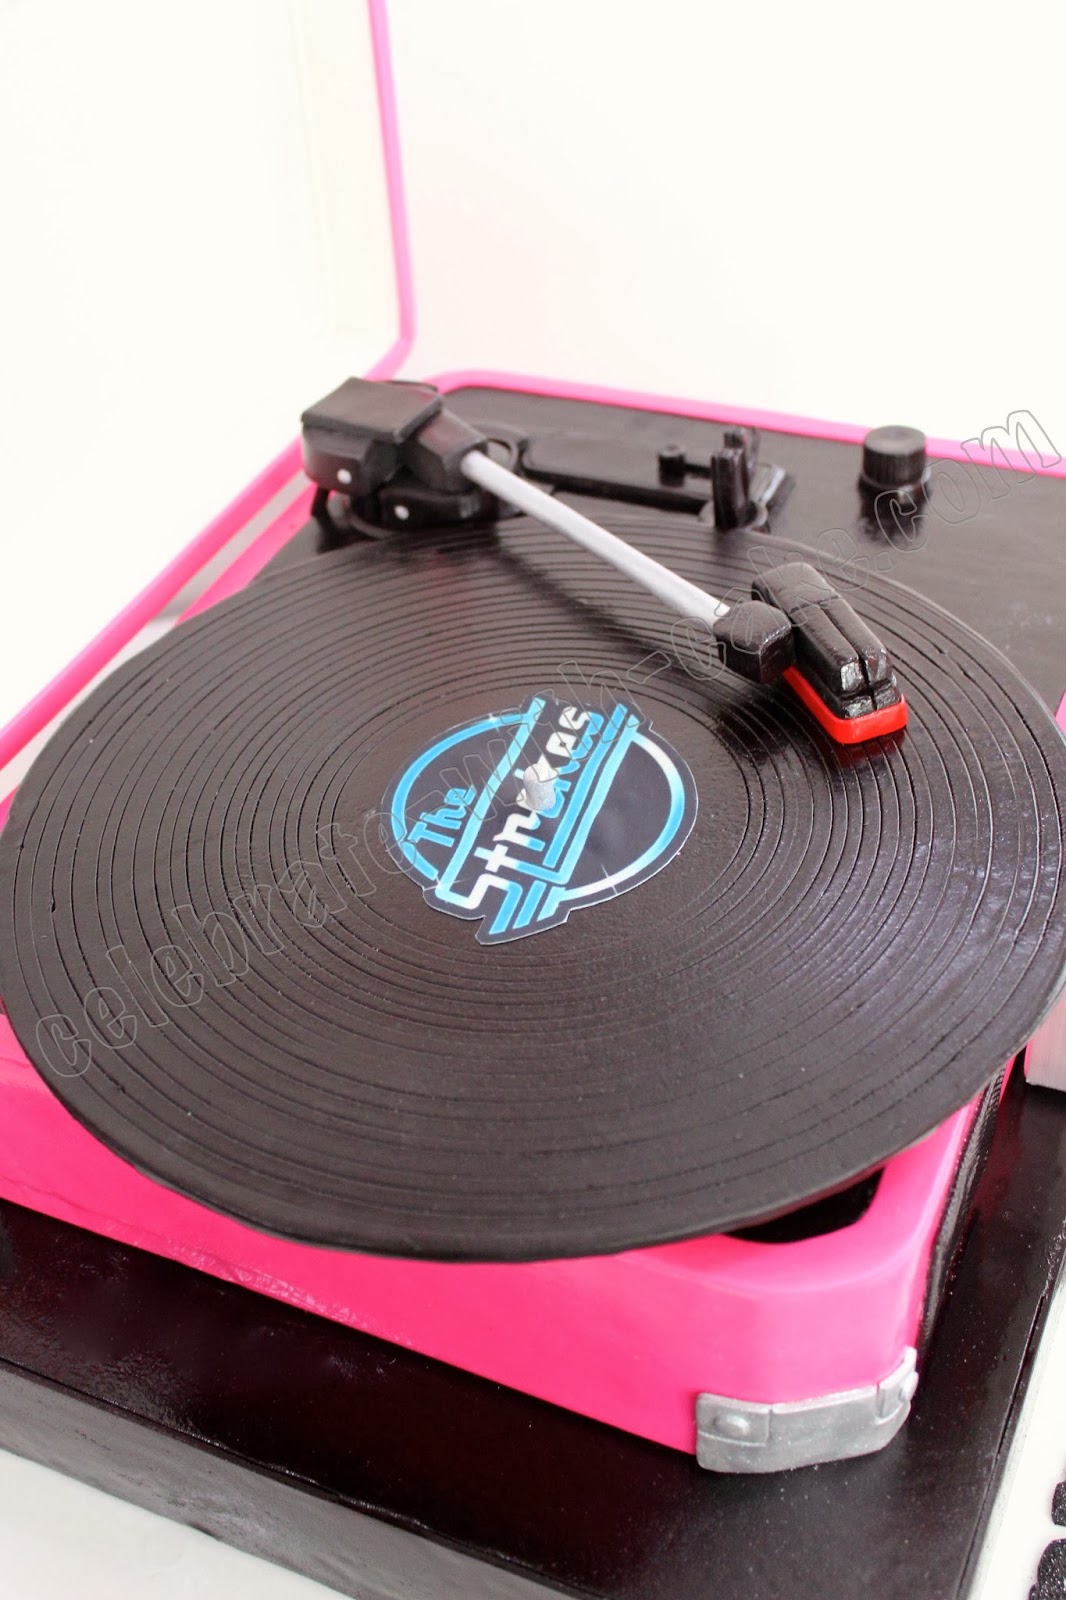 Celebrate With Cake 3d Sculpted Crosley Record Player 21st